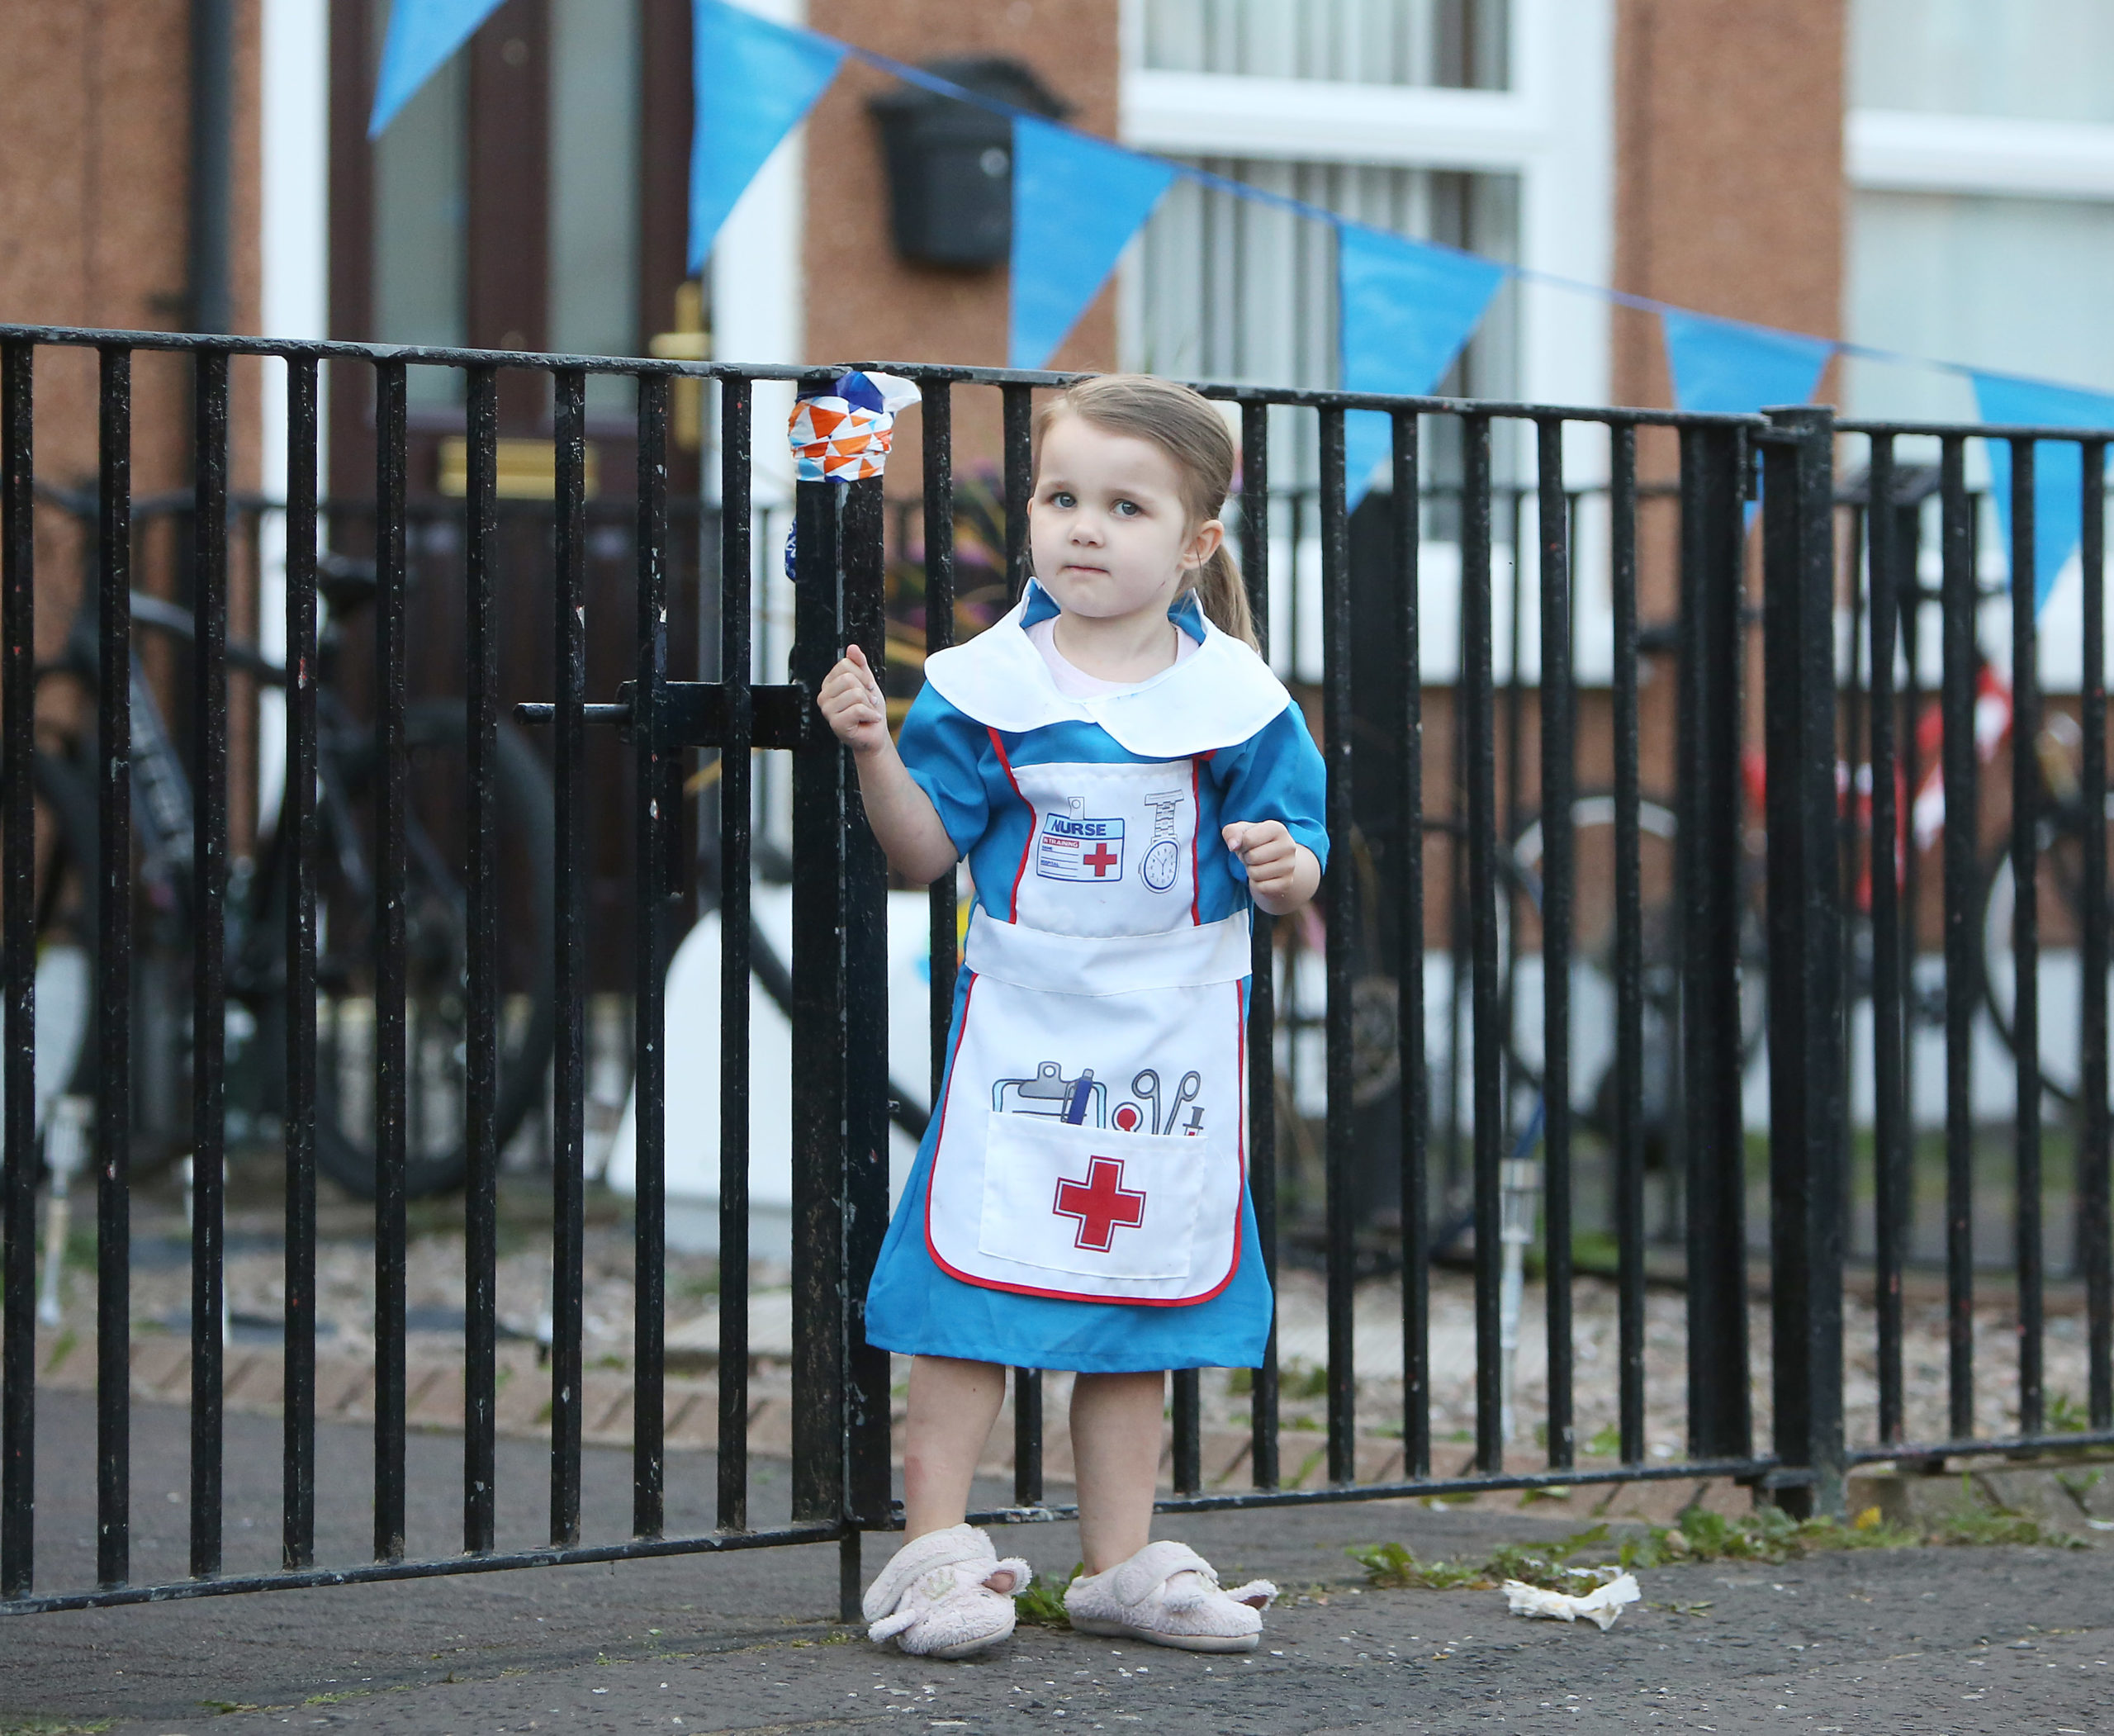 CLAP FOR CARERS: Little Christina Fennell of Aitnamona dresses up to salute the healthcare heroes